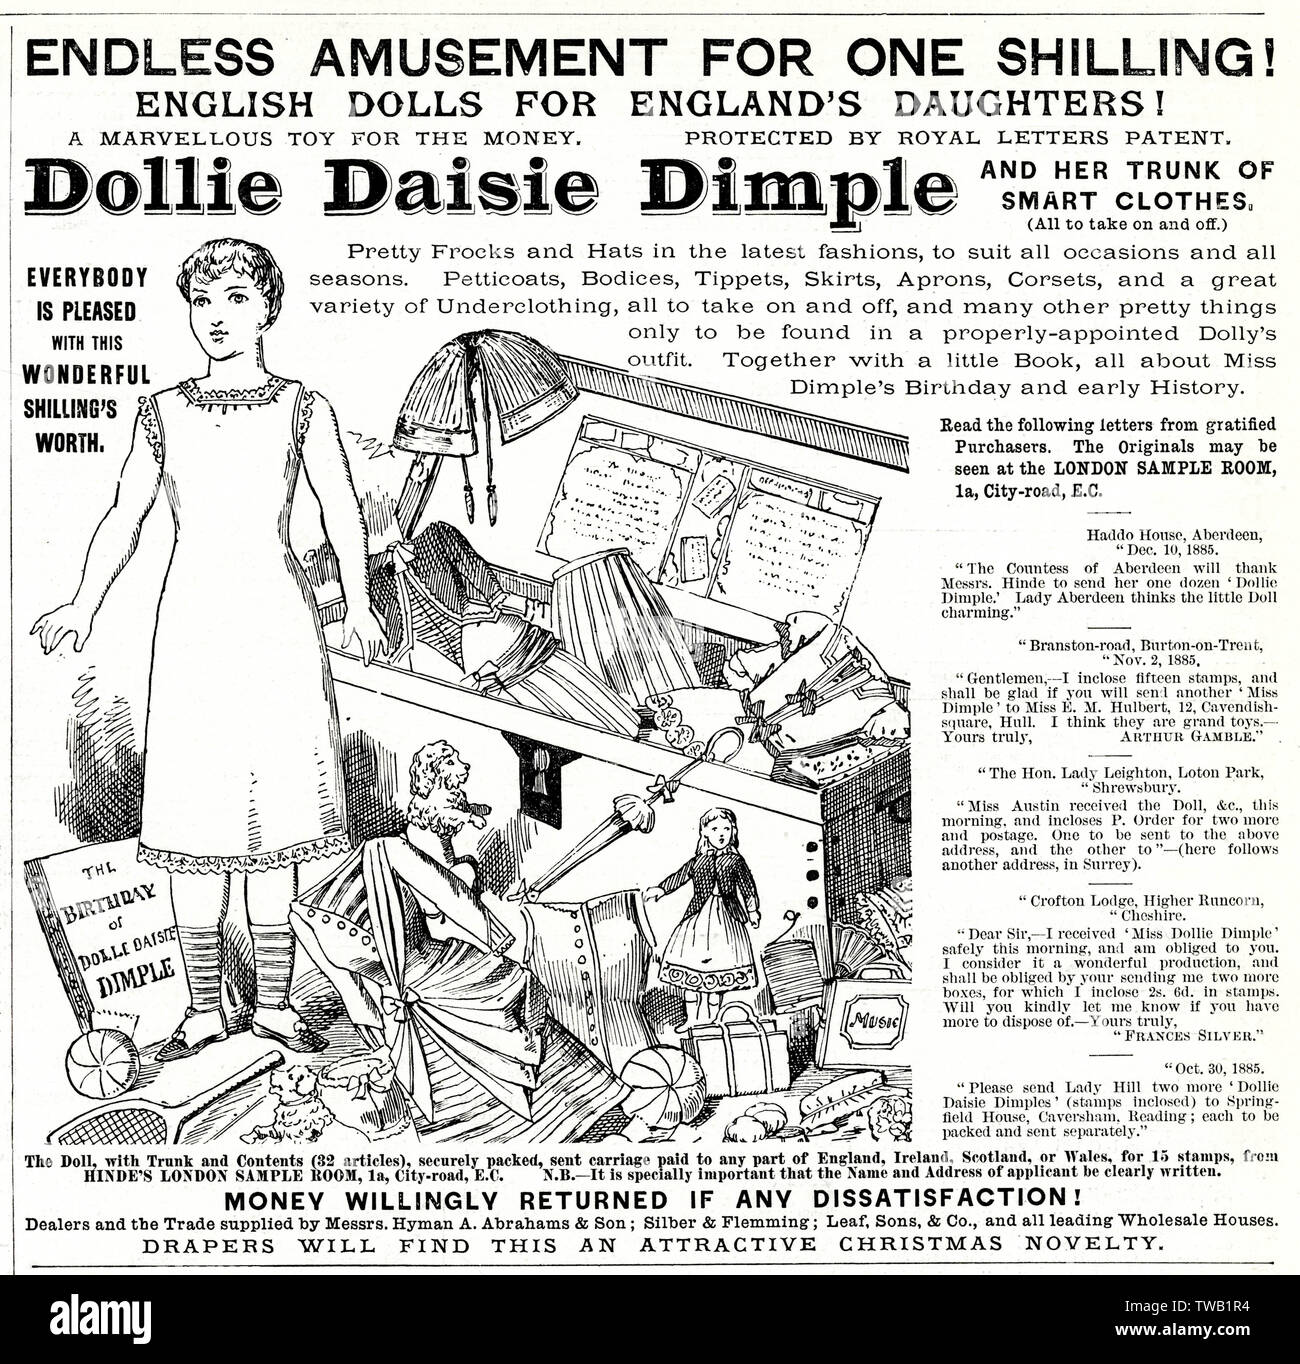 Dollie Daisie Dimple. &quot;Endless amusement for one shilling! English dolls for England's daughters!' Sold with a trunk and dollies accessories.     Date: 1886 Stock Photo